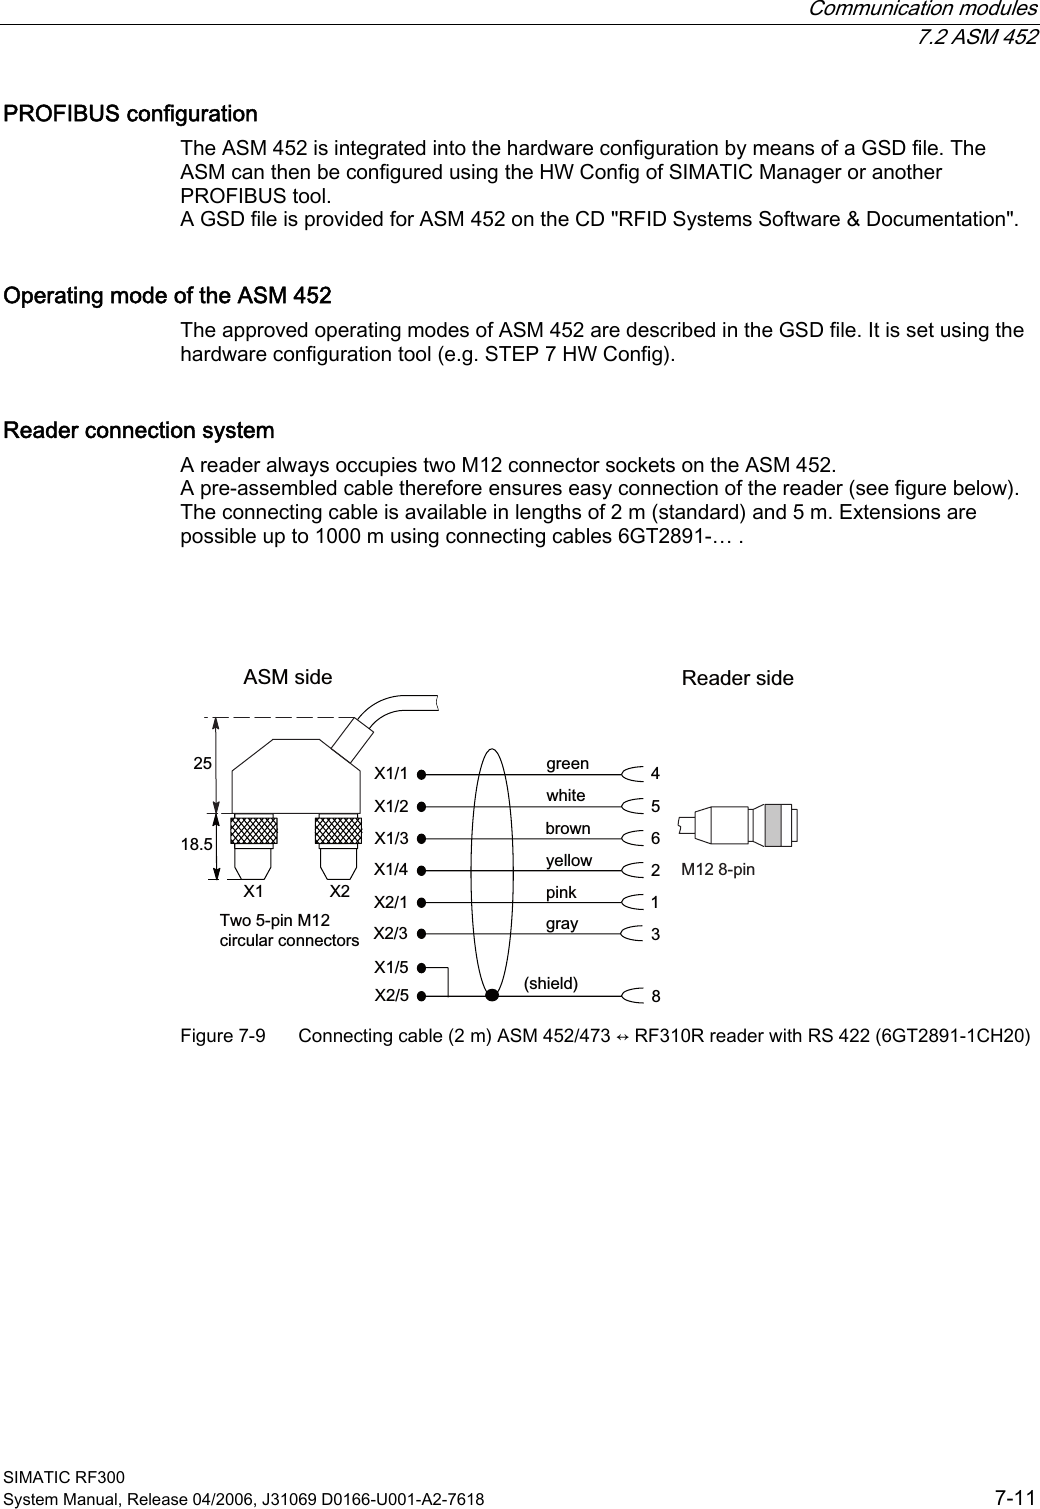  Communication modules  7.2 ASM 452 SIMATIC RF300 System Manual, Release 04/2006, J31069 D0166-U001-A2-7618  7-11 PROFIBUS configuration The ASM 452 is integrated into the hardware configuration by means of a GSD file. The ASM can then be configured using the HW Config of SIMATIC Manager or another PROFIBUS tool. A GSD file is provided for ASM 452 on the CD &quot;RFID Systems Software &amp; Documentation&quot;. Operating mode of the ASM 452 The approved operating modes of ASM 452 are described in the GSD file. It is set using the hardware configuration tool (e.g. STEP 7 HW Config). Reader connection system A reader always occupies two M12 connector sockets on the ASM 452. A pre-assembled cable therefore ensures easy connection of the reader (see figure below). The connecting cable is available in lengths of 2 m (standard) and 5 m. Extensions are possible up to 1000 m using connecting cables 6GT2891-… .    JUD\JUHHQZKLWHEURZQ\HOORZSLQNVKLHOG7ZRSLQ0FLUFXODUFRQQHFWRUV$60VLGH 5HDGHUVLGH0SLQ ;;;;;;; ; ;; Figure 7-9  Connecting cable (2 m) ASM 452/473 ↔ RF310R reader with RS 422 (6GT2891-1CH20)  